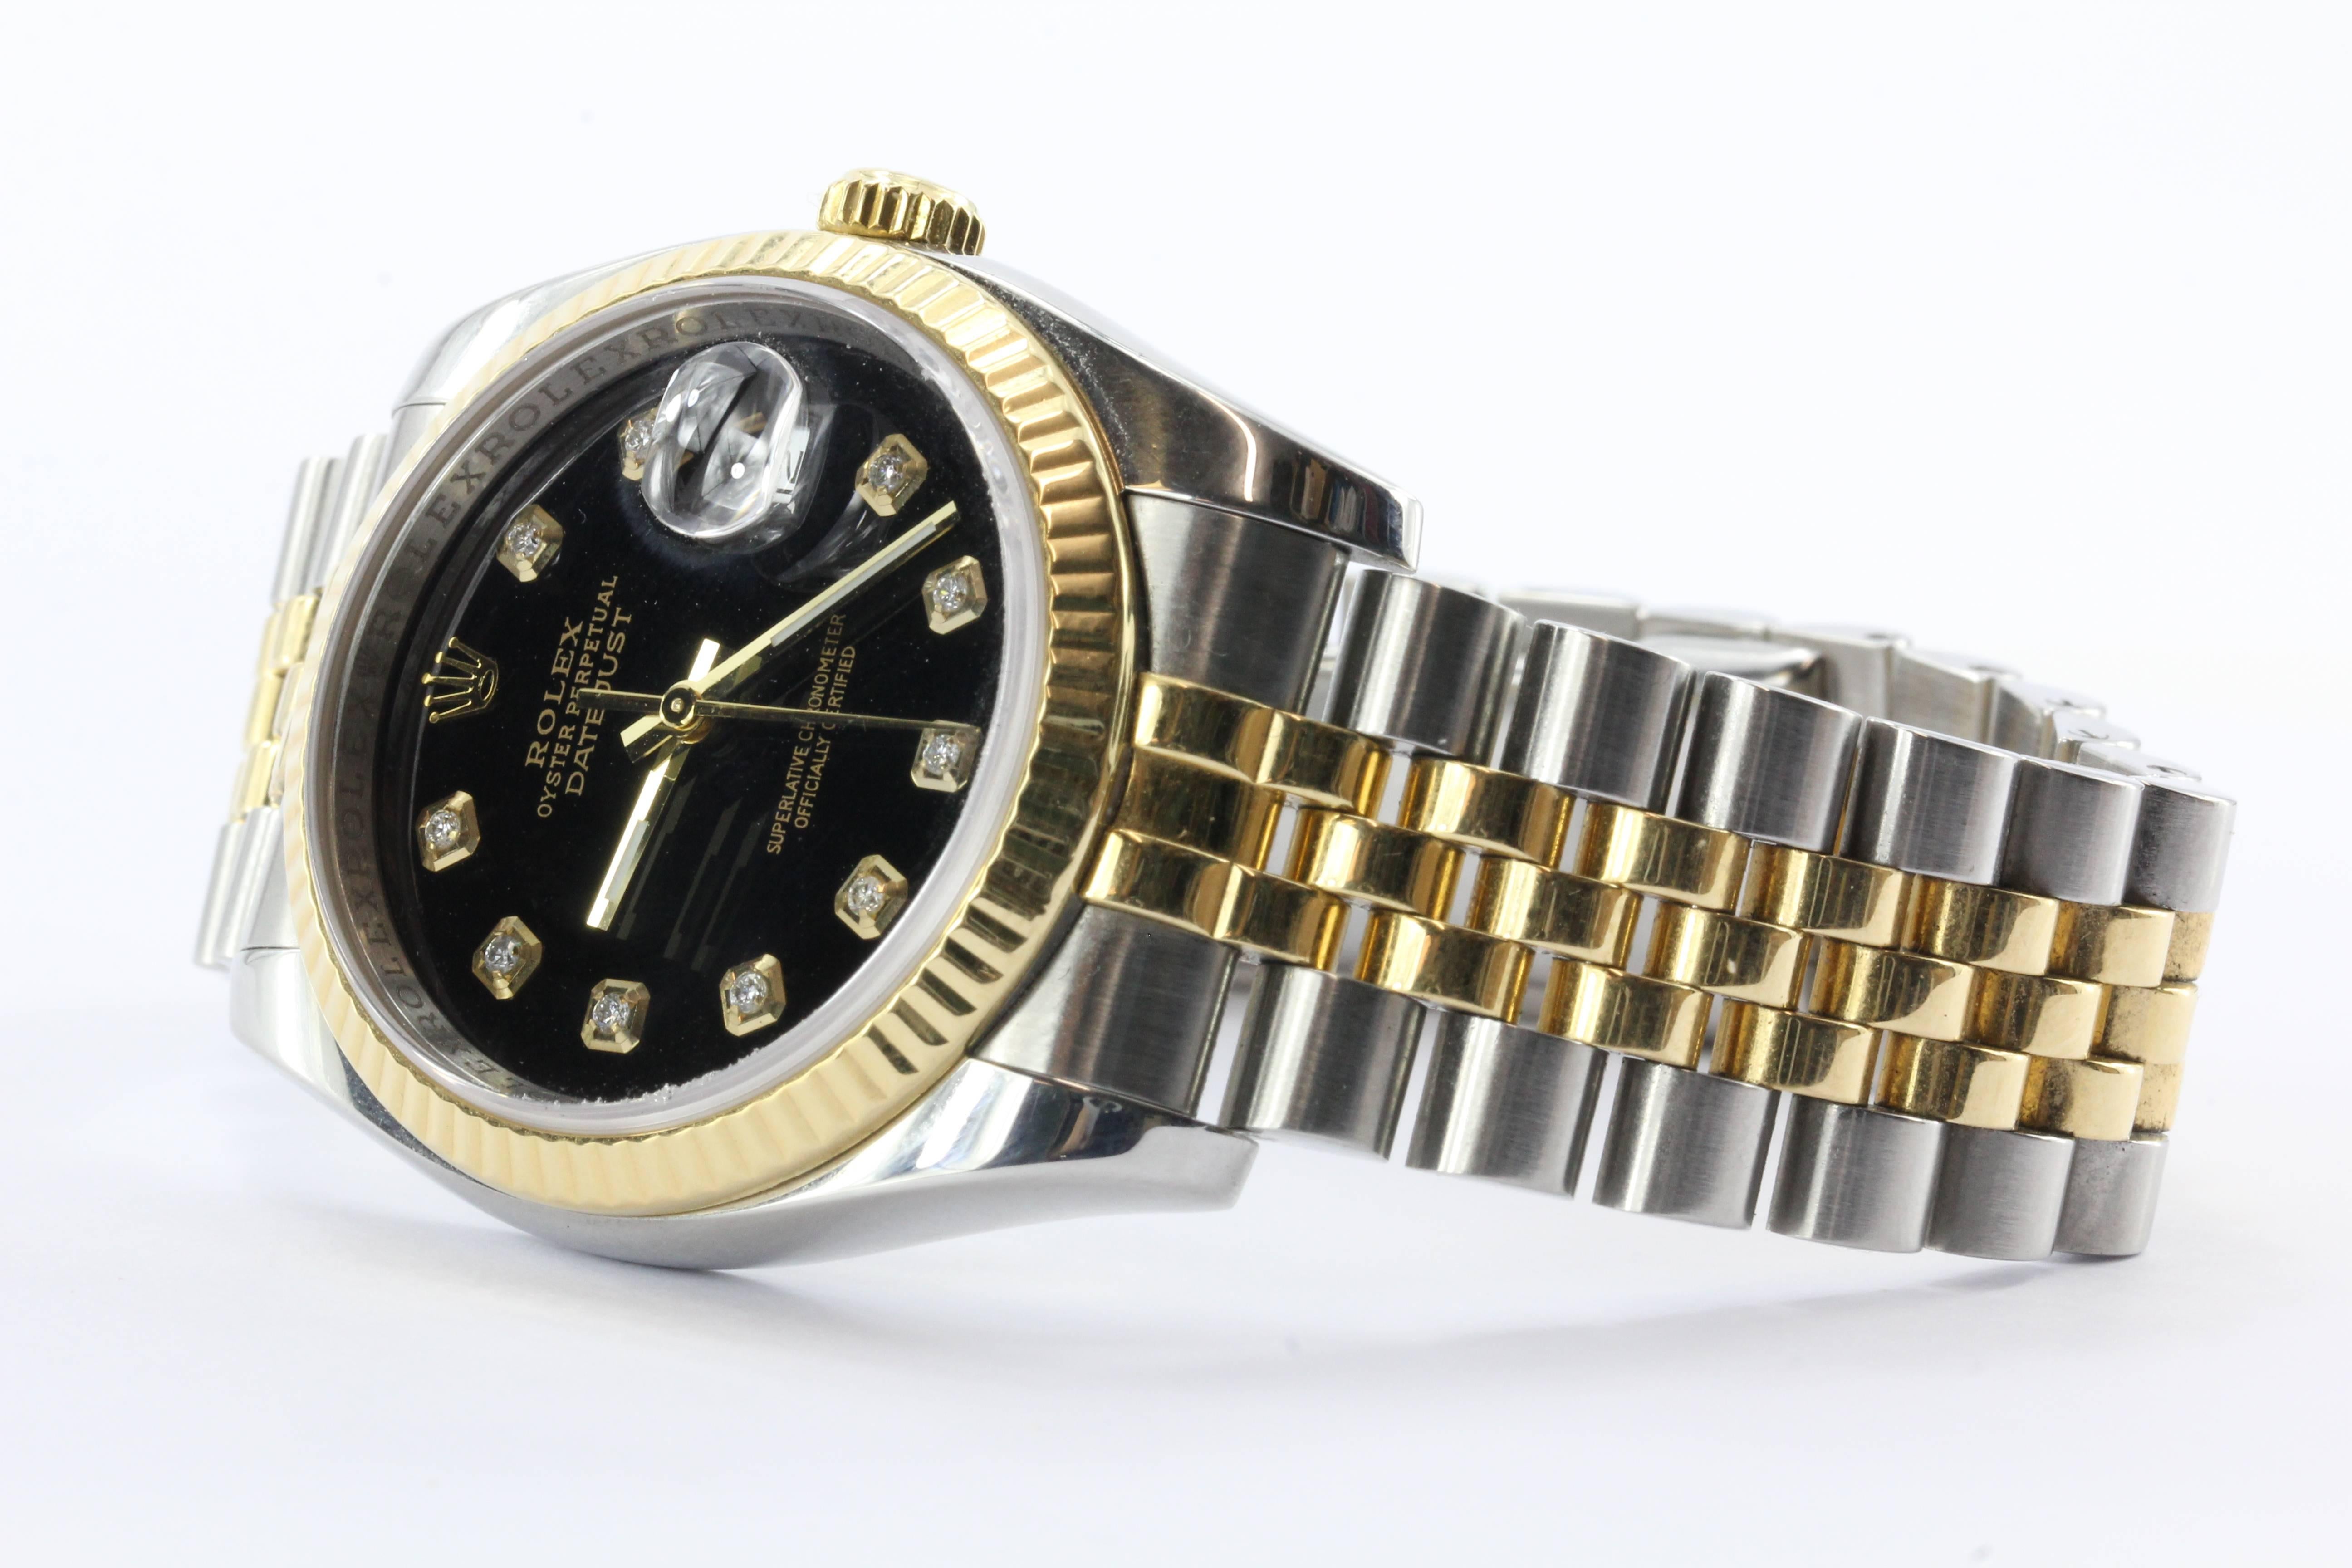 Rolex Oyster Perpetual Date Just 116233 Steel & 18K Gold Diamond Black Watch. The watch is in excellent gently used estate condition, keeping great time and ready to wear. Comes with original box but no paperwork. The case is 18K yellow gold and